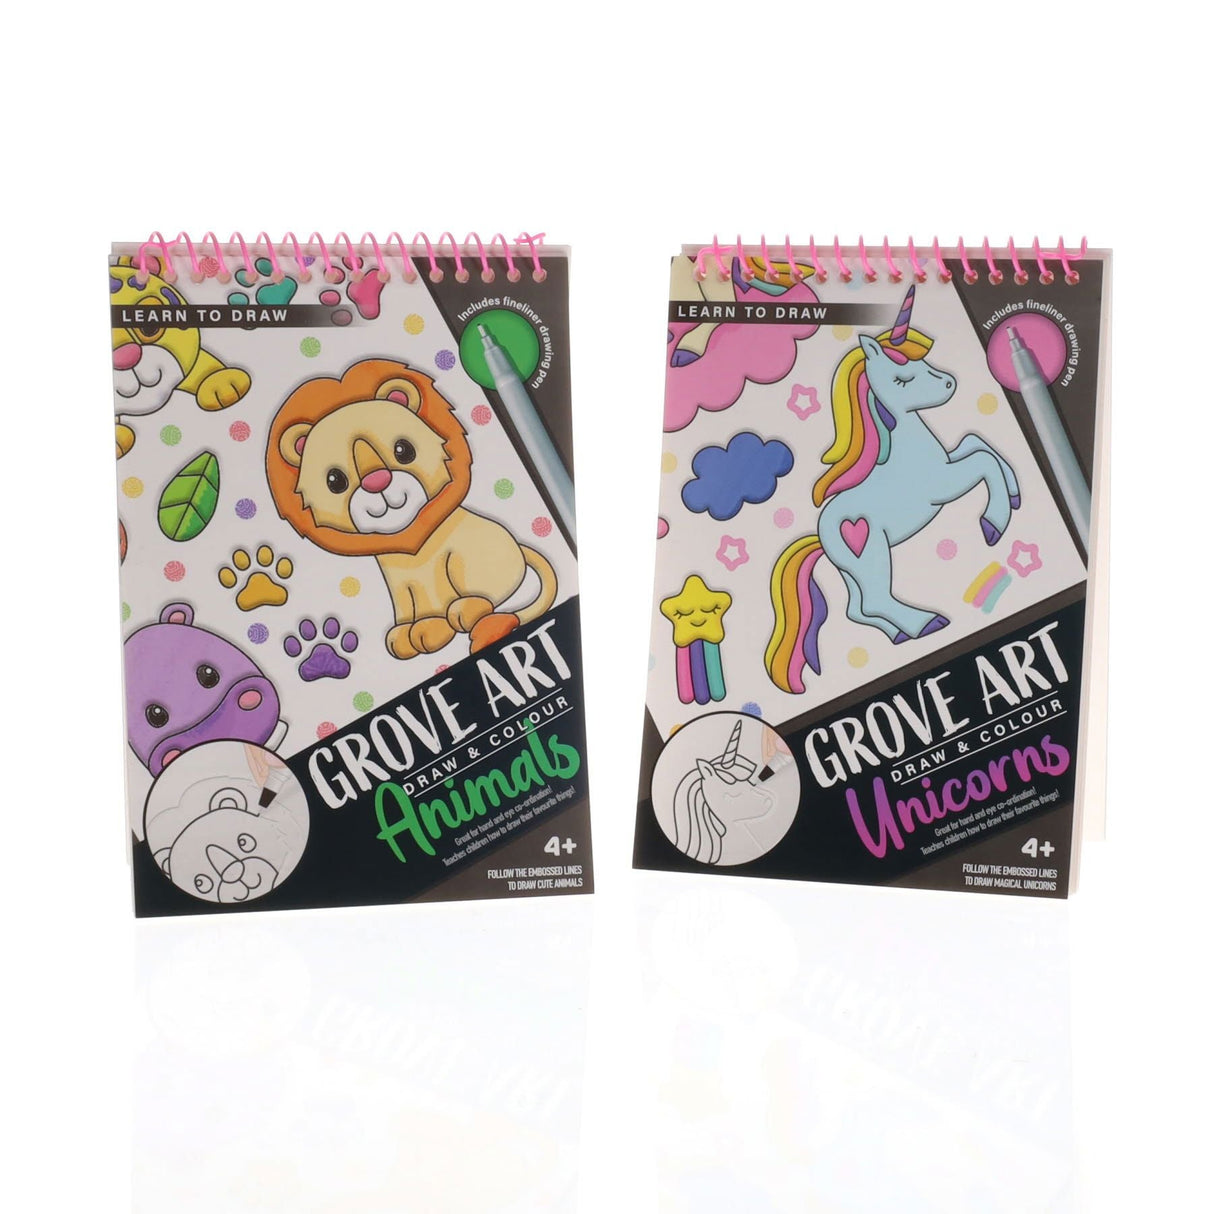 World of Colour Learn-To-Draw Sketch Pad - Lion-Activity Books-World of Colour|StationeryShop.co.uk